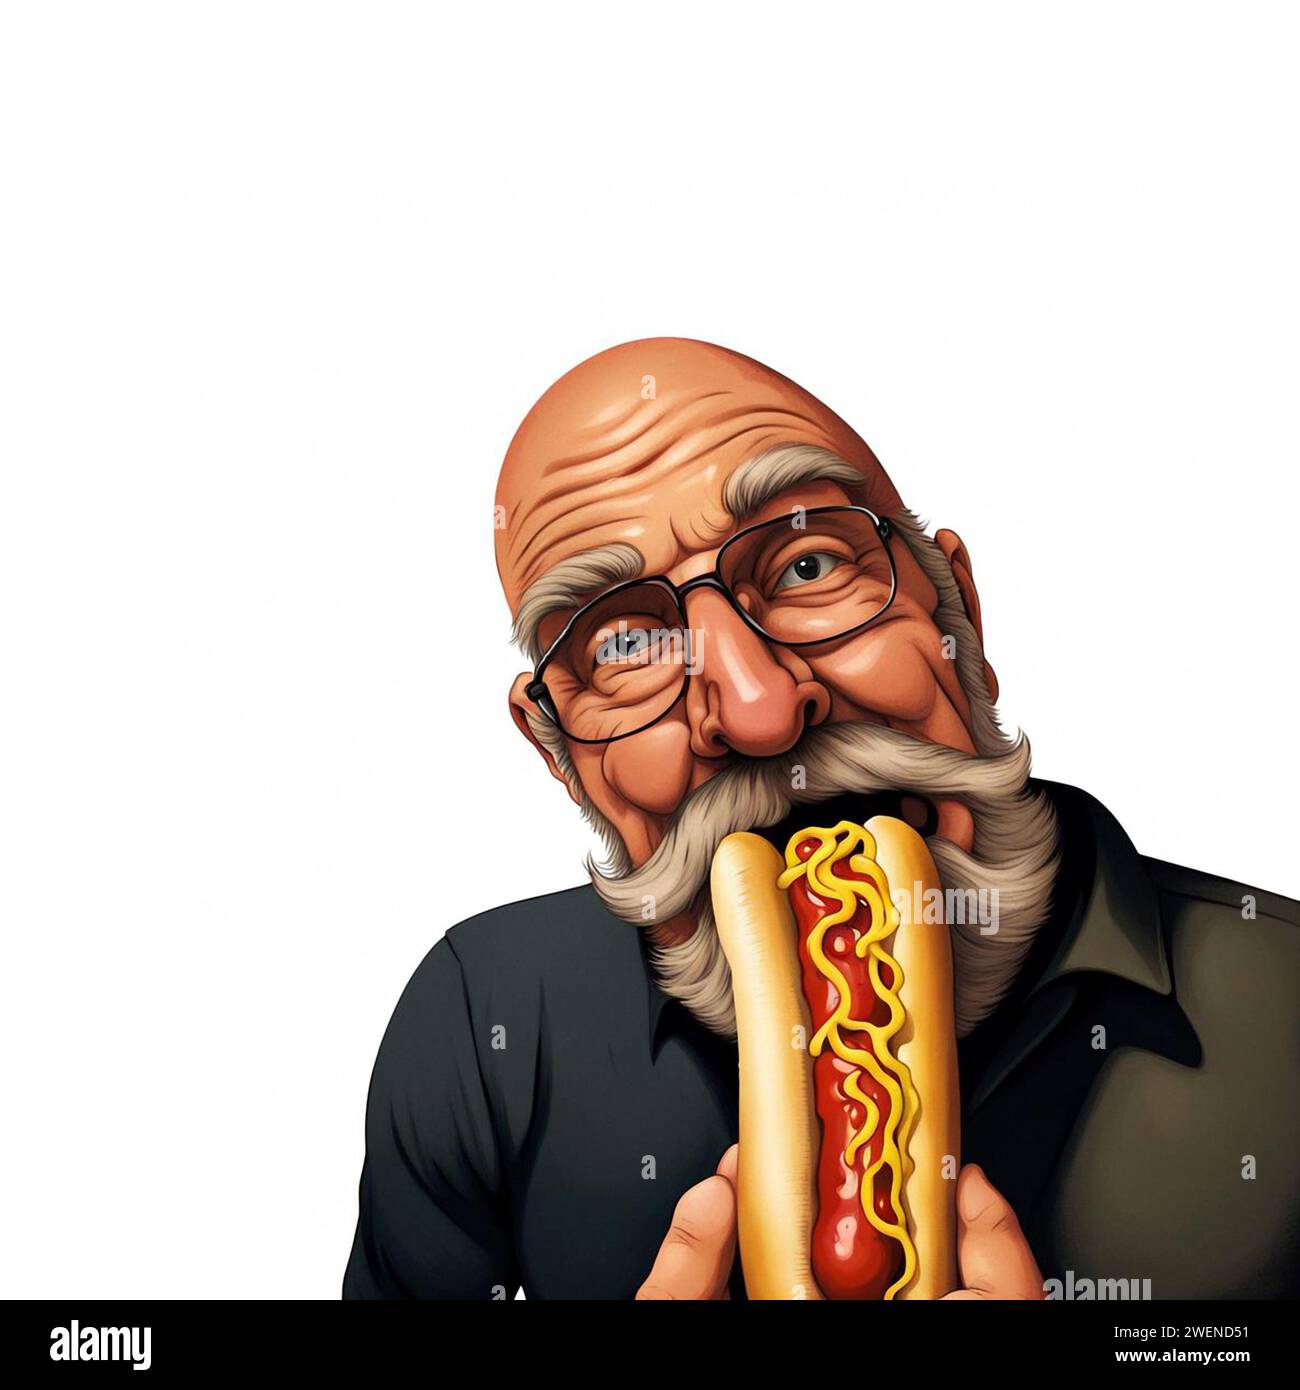 Man eating a hot dog, funny cartoon look. Copy space. Stuffing a loaded hot dog into his mouth. Stock Photo